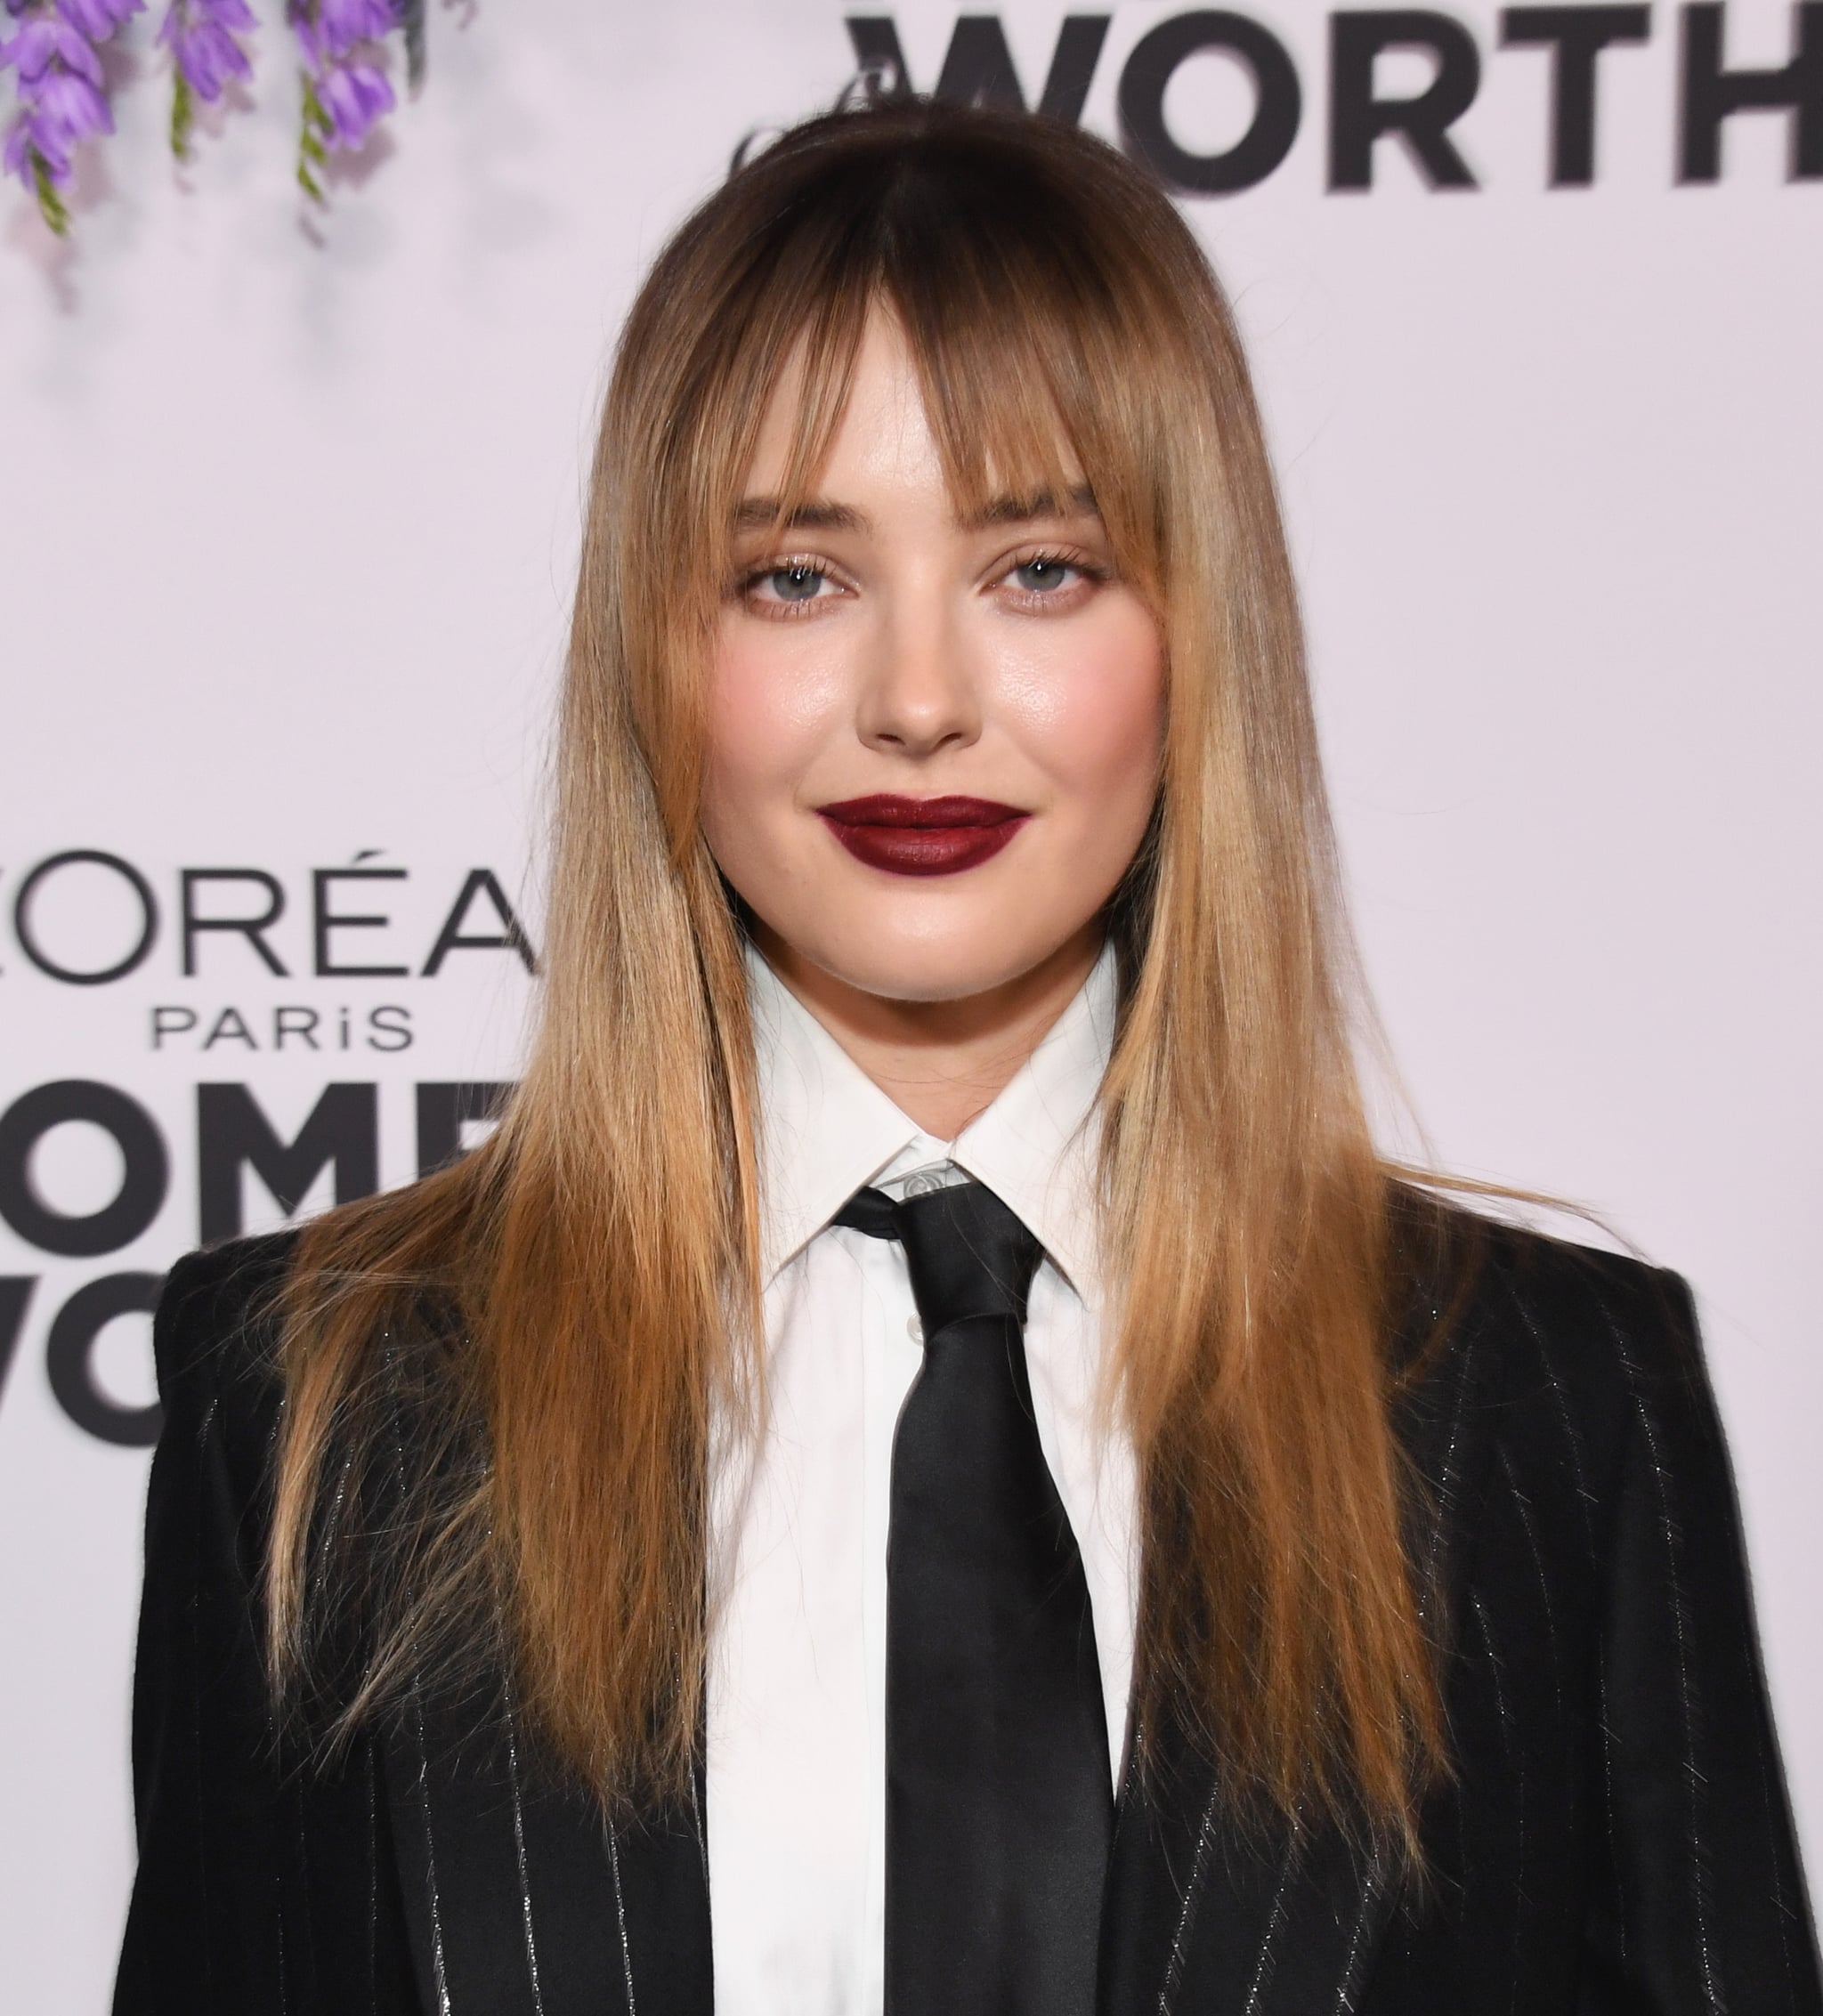 LOS ANGELES, CALIFORNIA - DECEMBER 01: Katherine Langford attends L'Oréal Paris' Women Of Worth Celebration at Ebell Club Los Angeles on December 01, 2022 in Los Angeles, California.  (Photo by Jon Kopaloff/Getty Images)